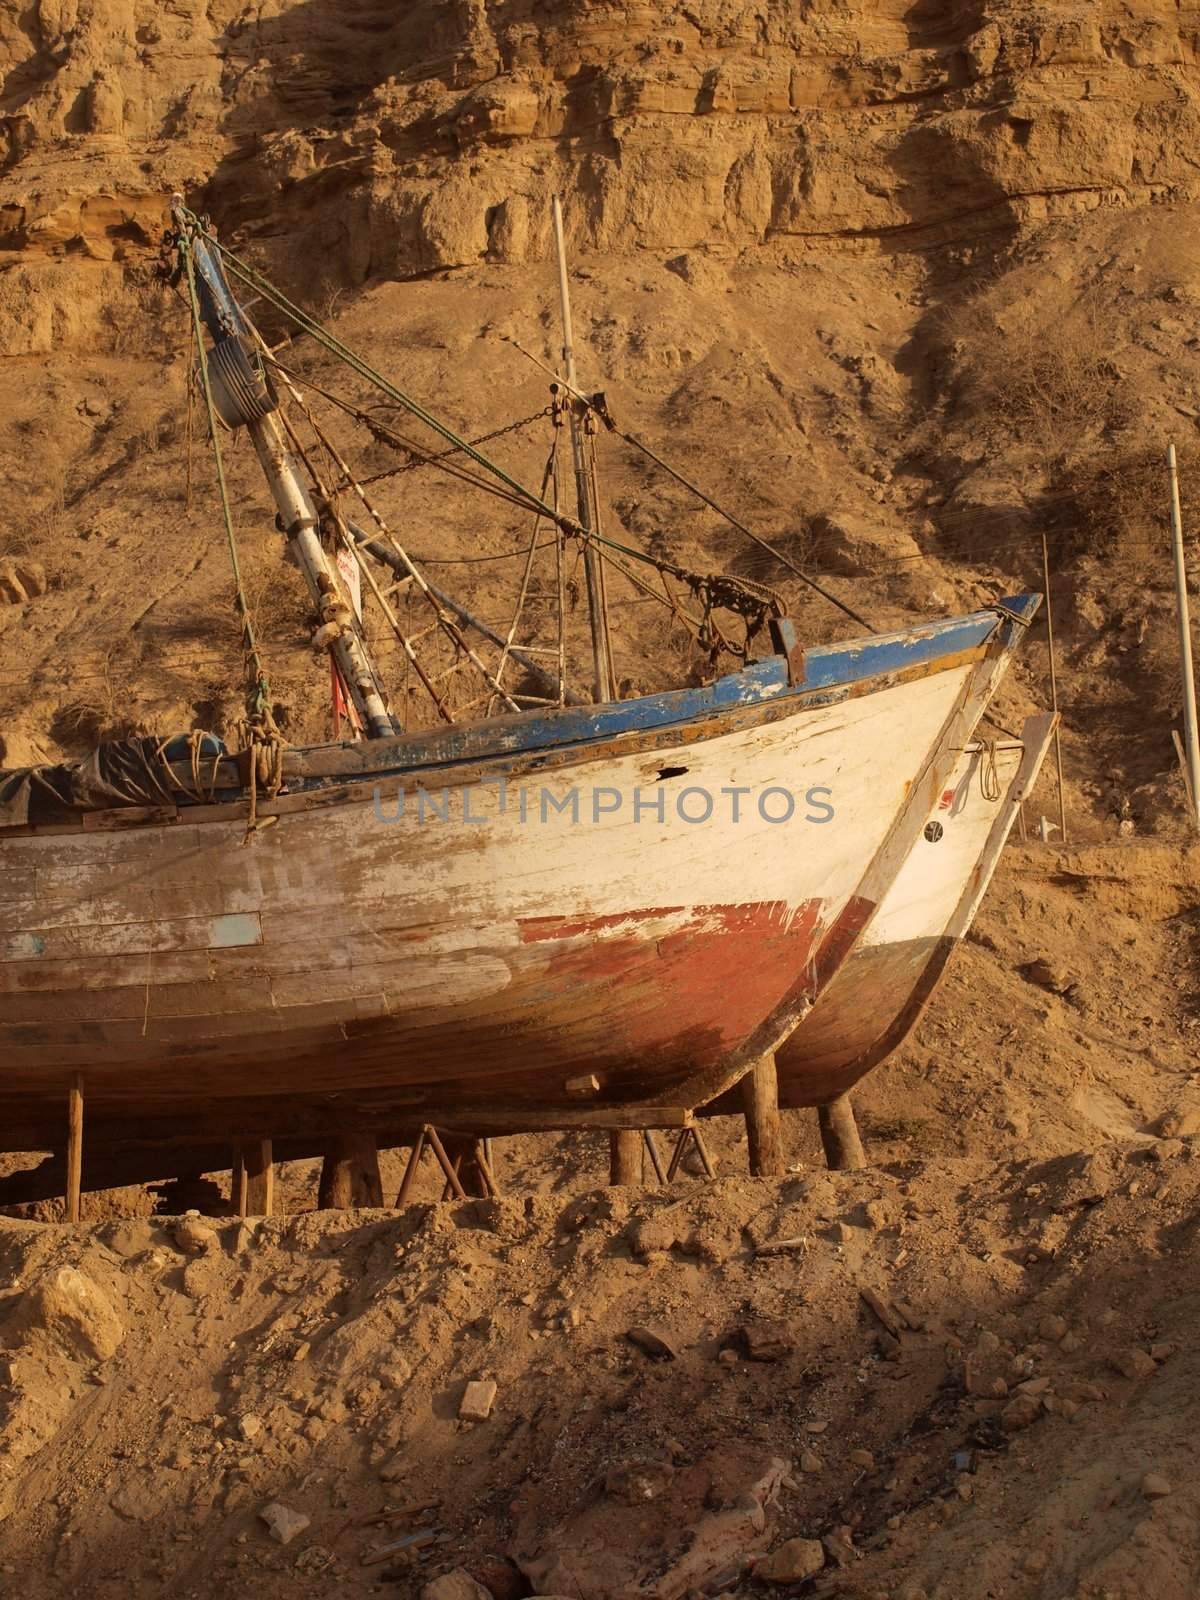 Ships parked on the sandy shore for reparation